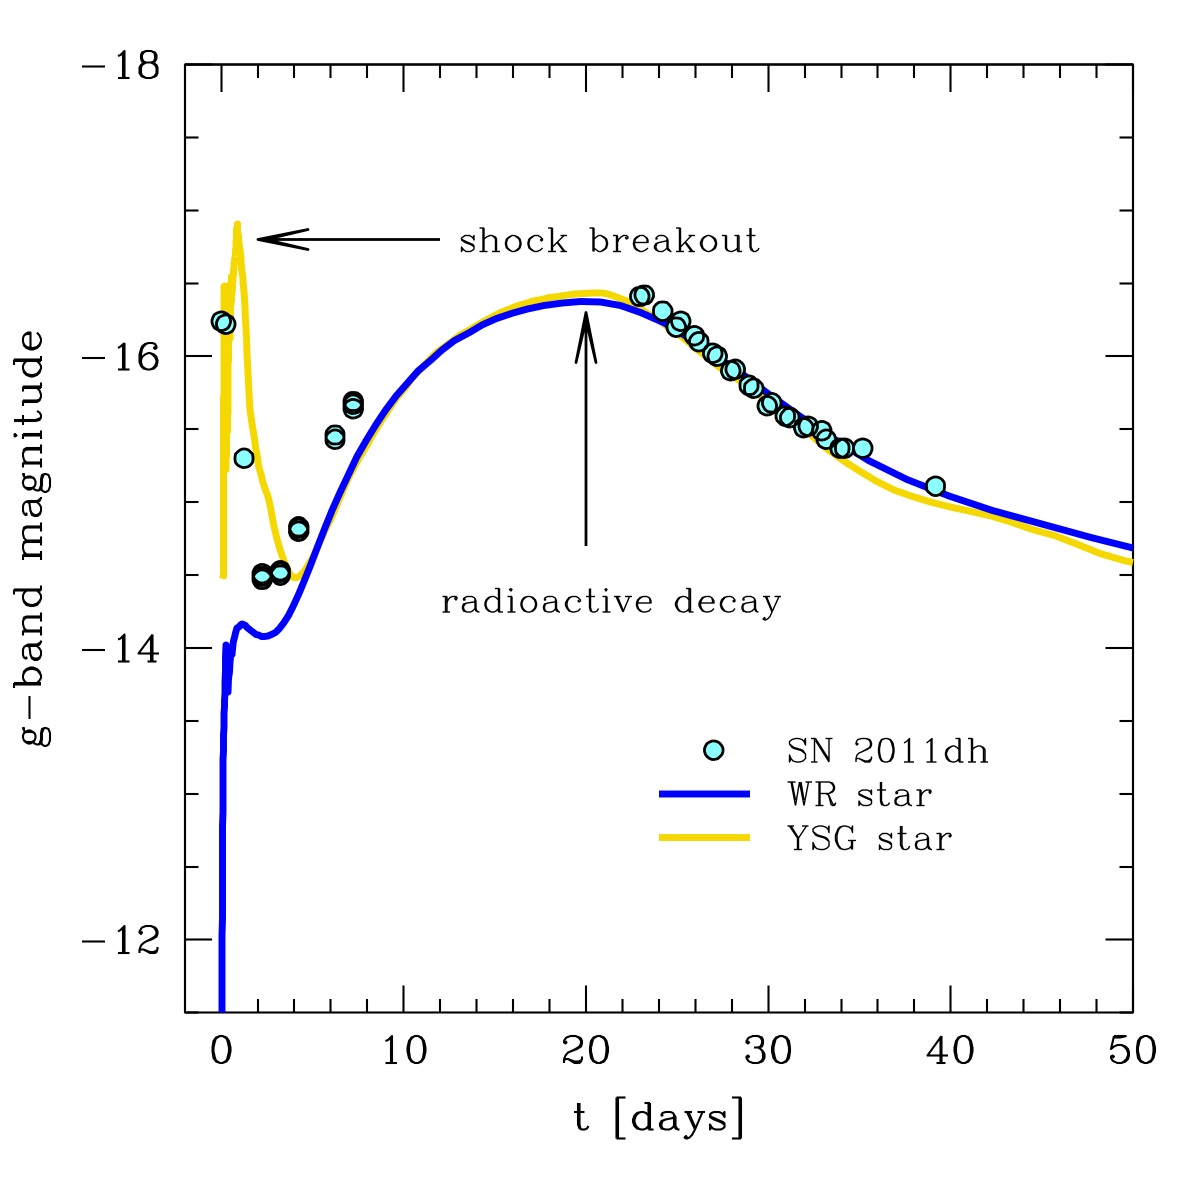 Figure 2: The theoretical light curve for a yellow supergiant (yellow) and blue compact (blue) progenitor compared with the observations of SN 2011dh (cyan circles). From the figure it is clear that the progenitor of SN 2011dh needs to be a yellow supergiant in order to reproduce the observation.